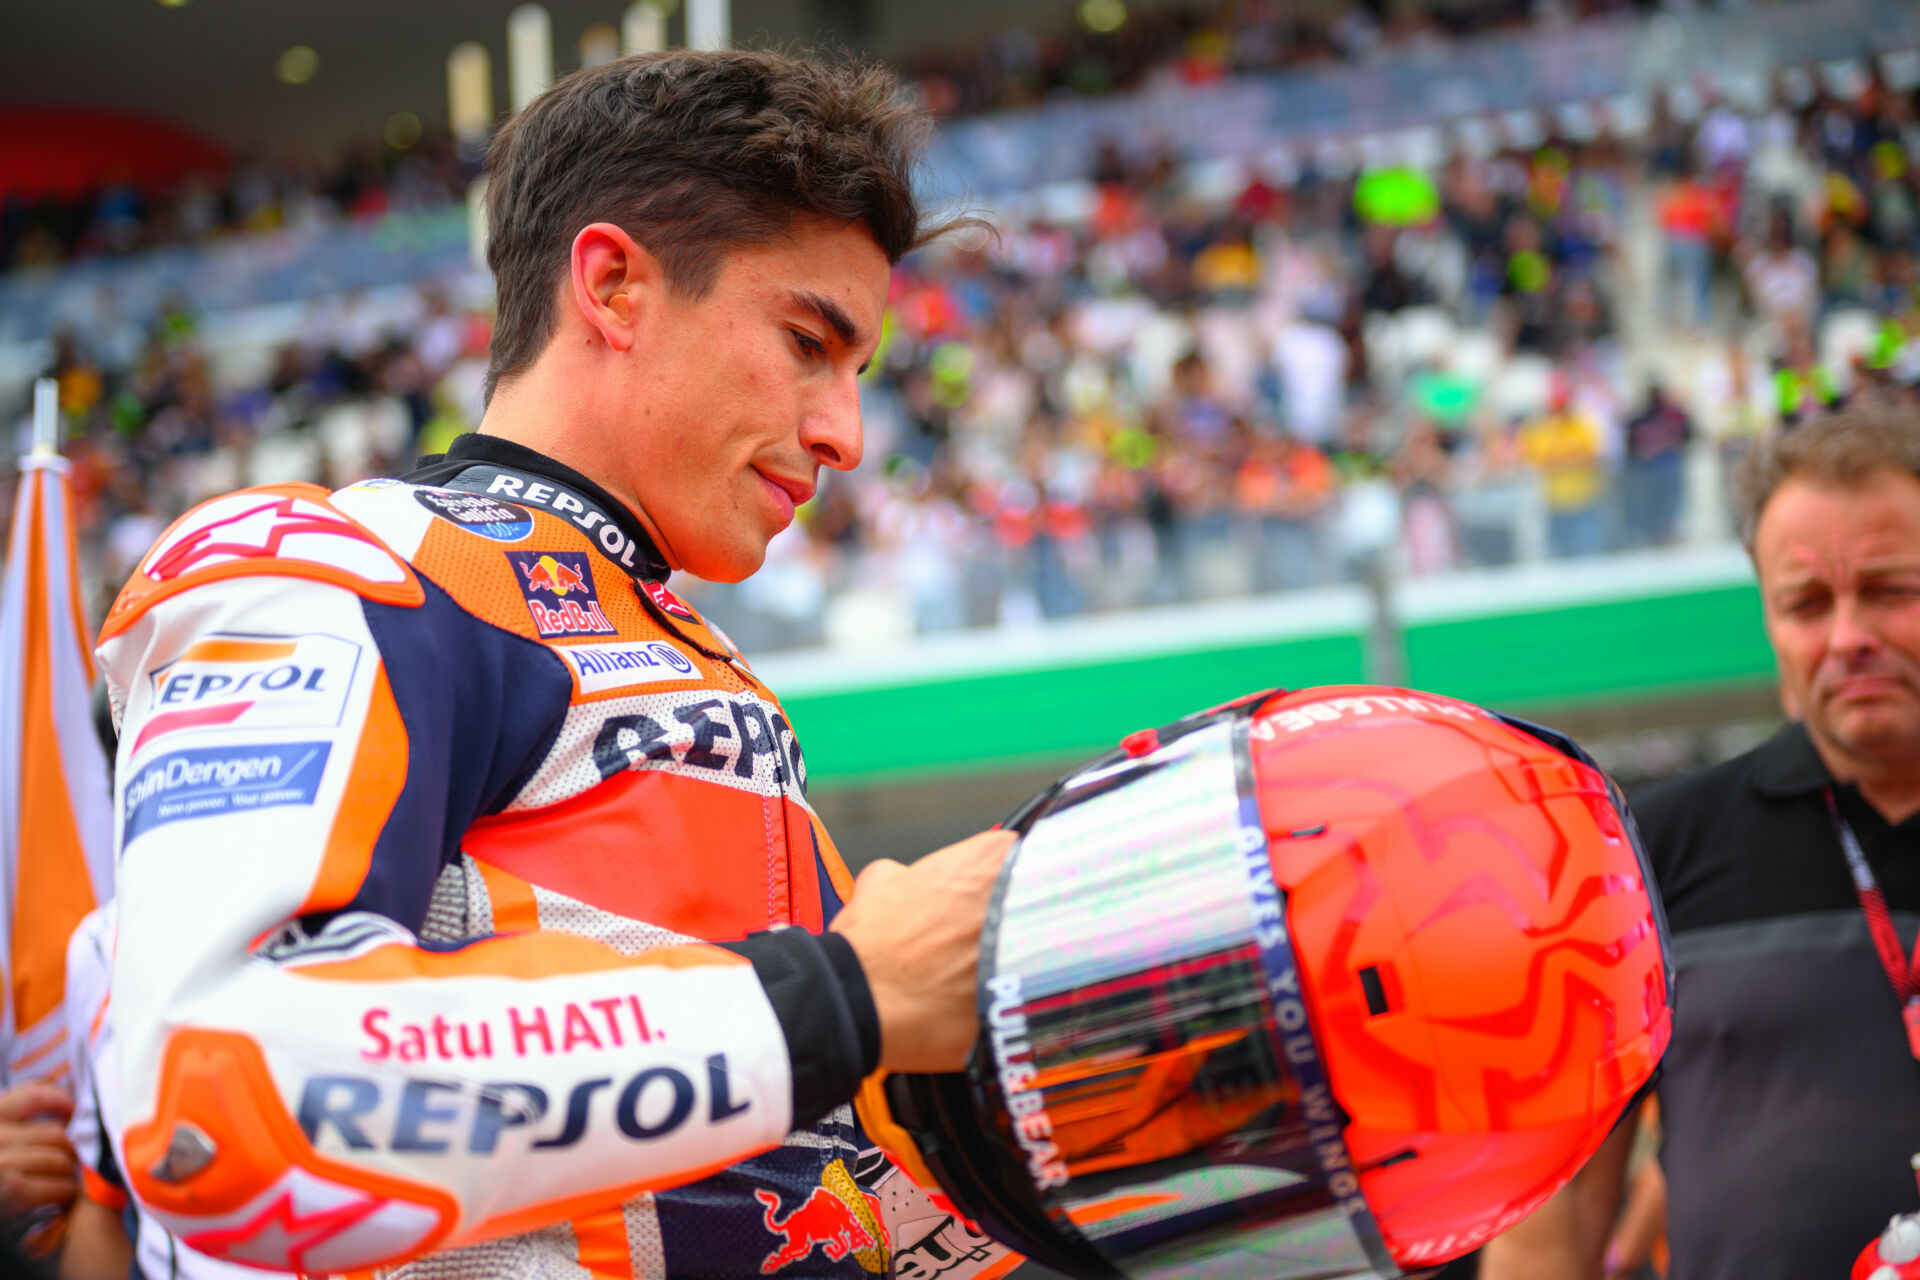 Marc Marquez on the grid at Mugello, his last race before having surgery. Photo by Kohei Hirota.